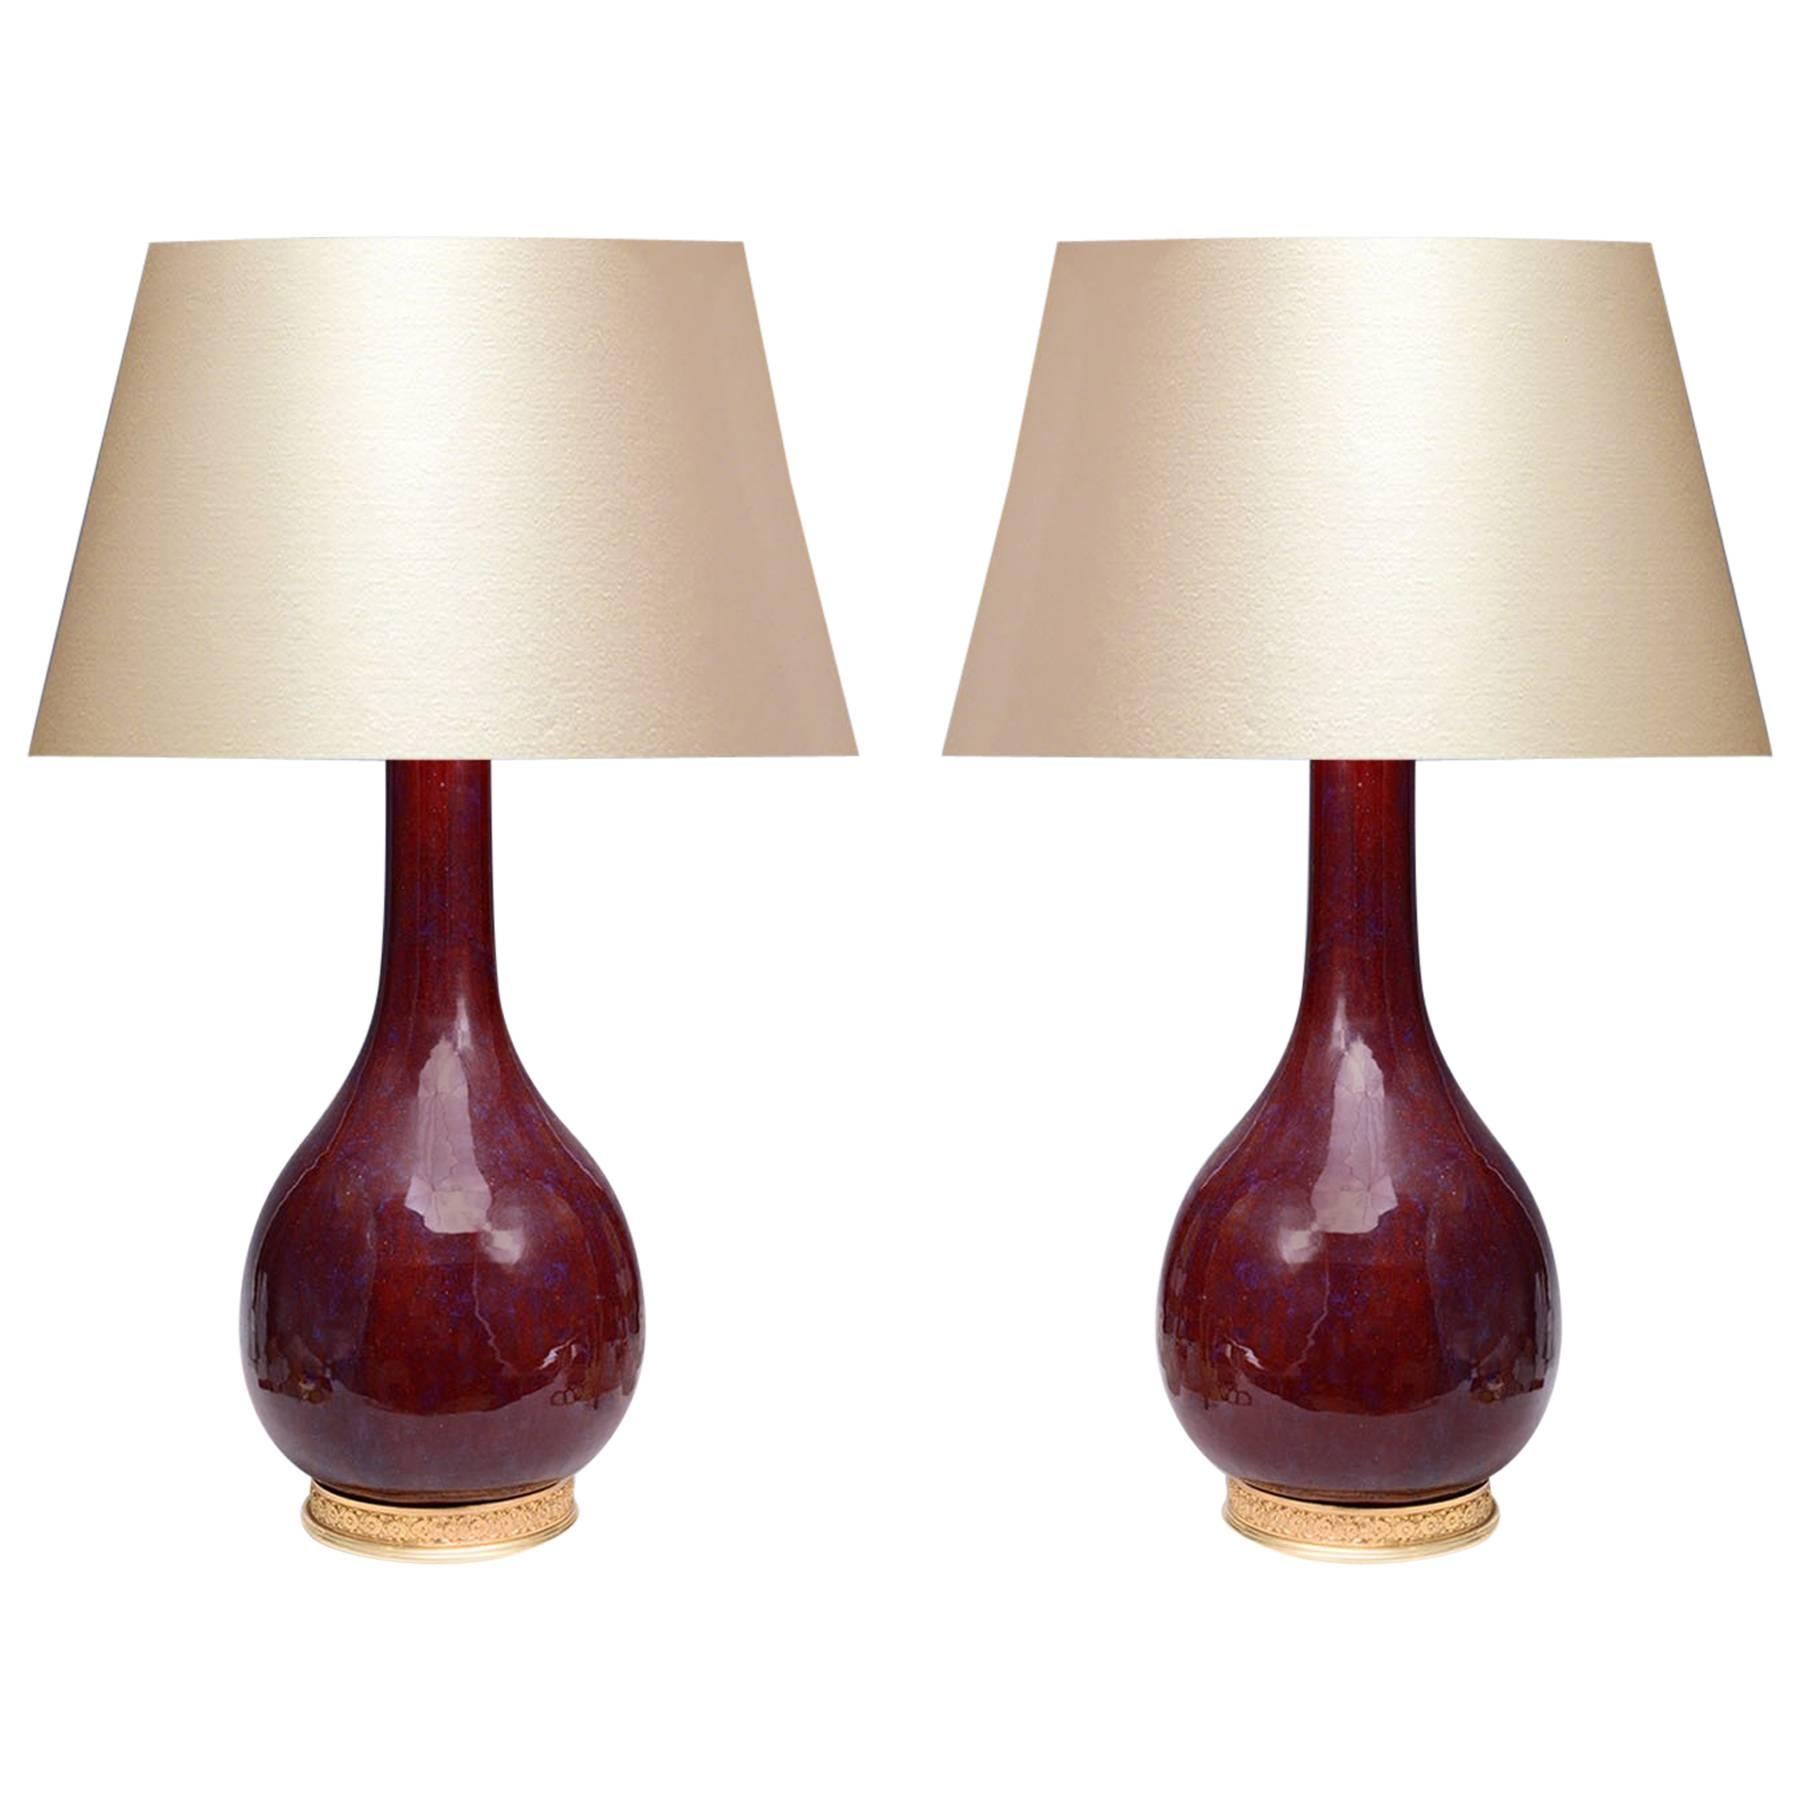 Pair of Red-Glazed Porcelain Lamps